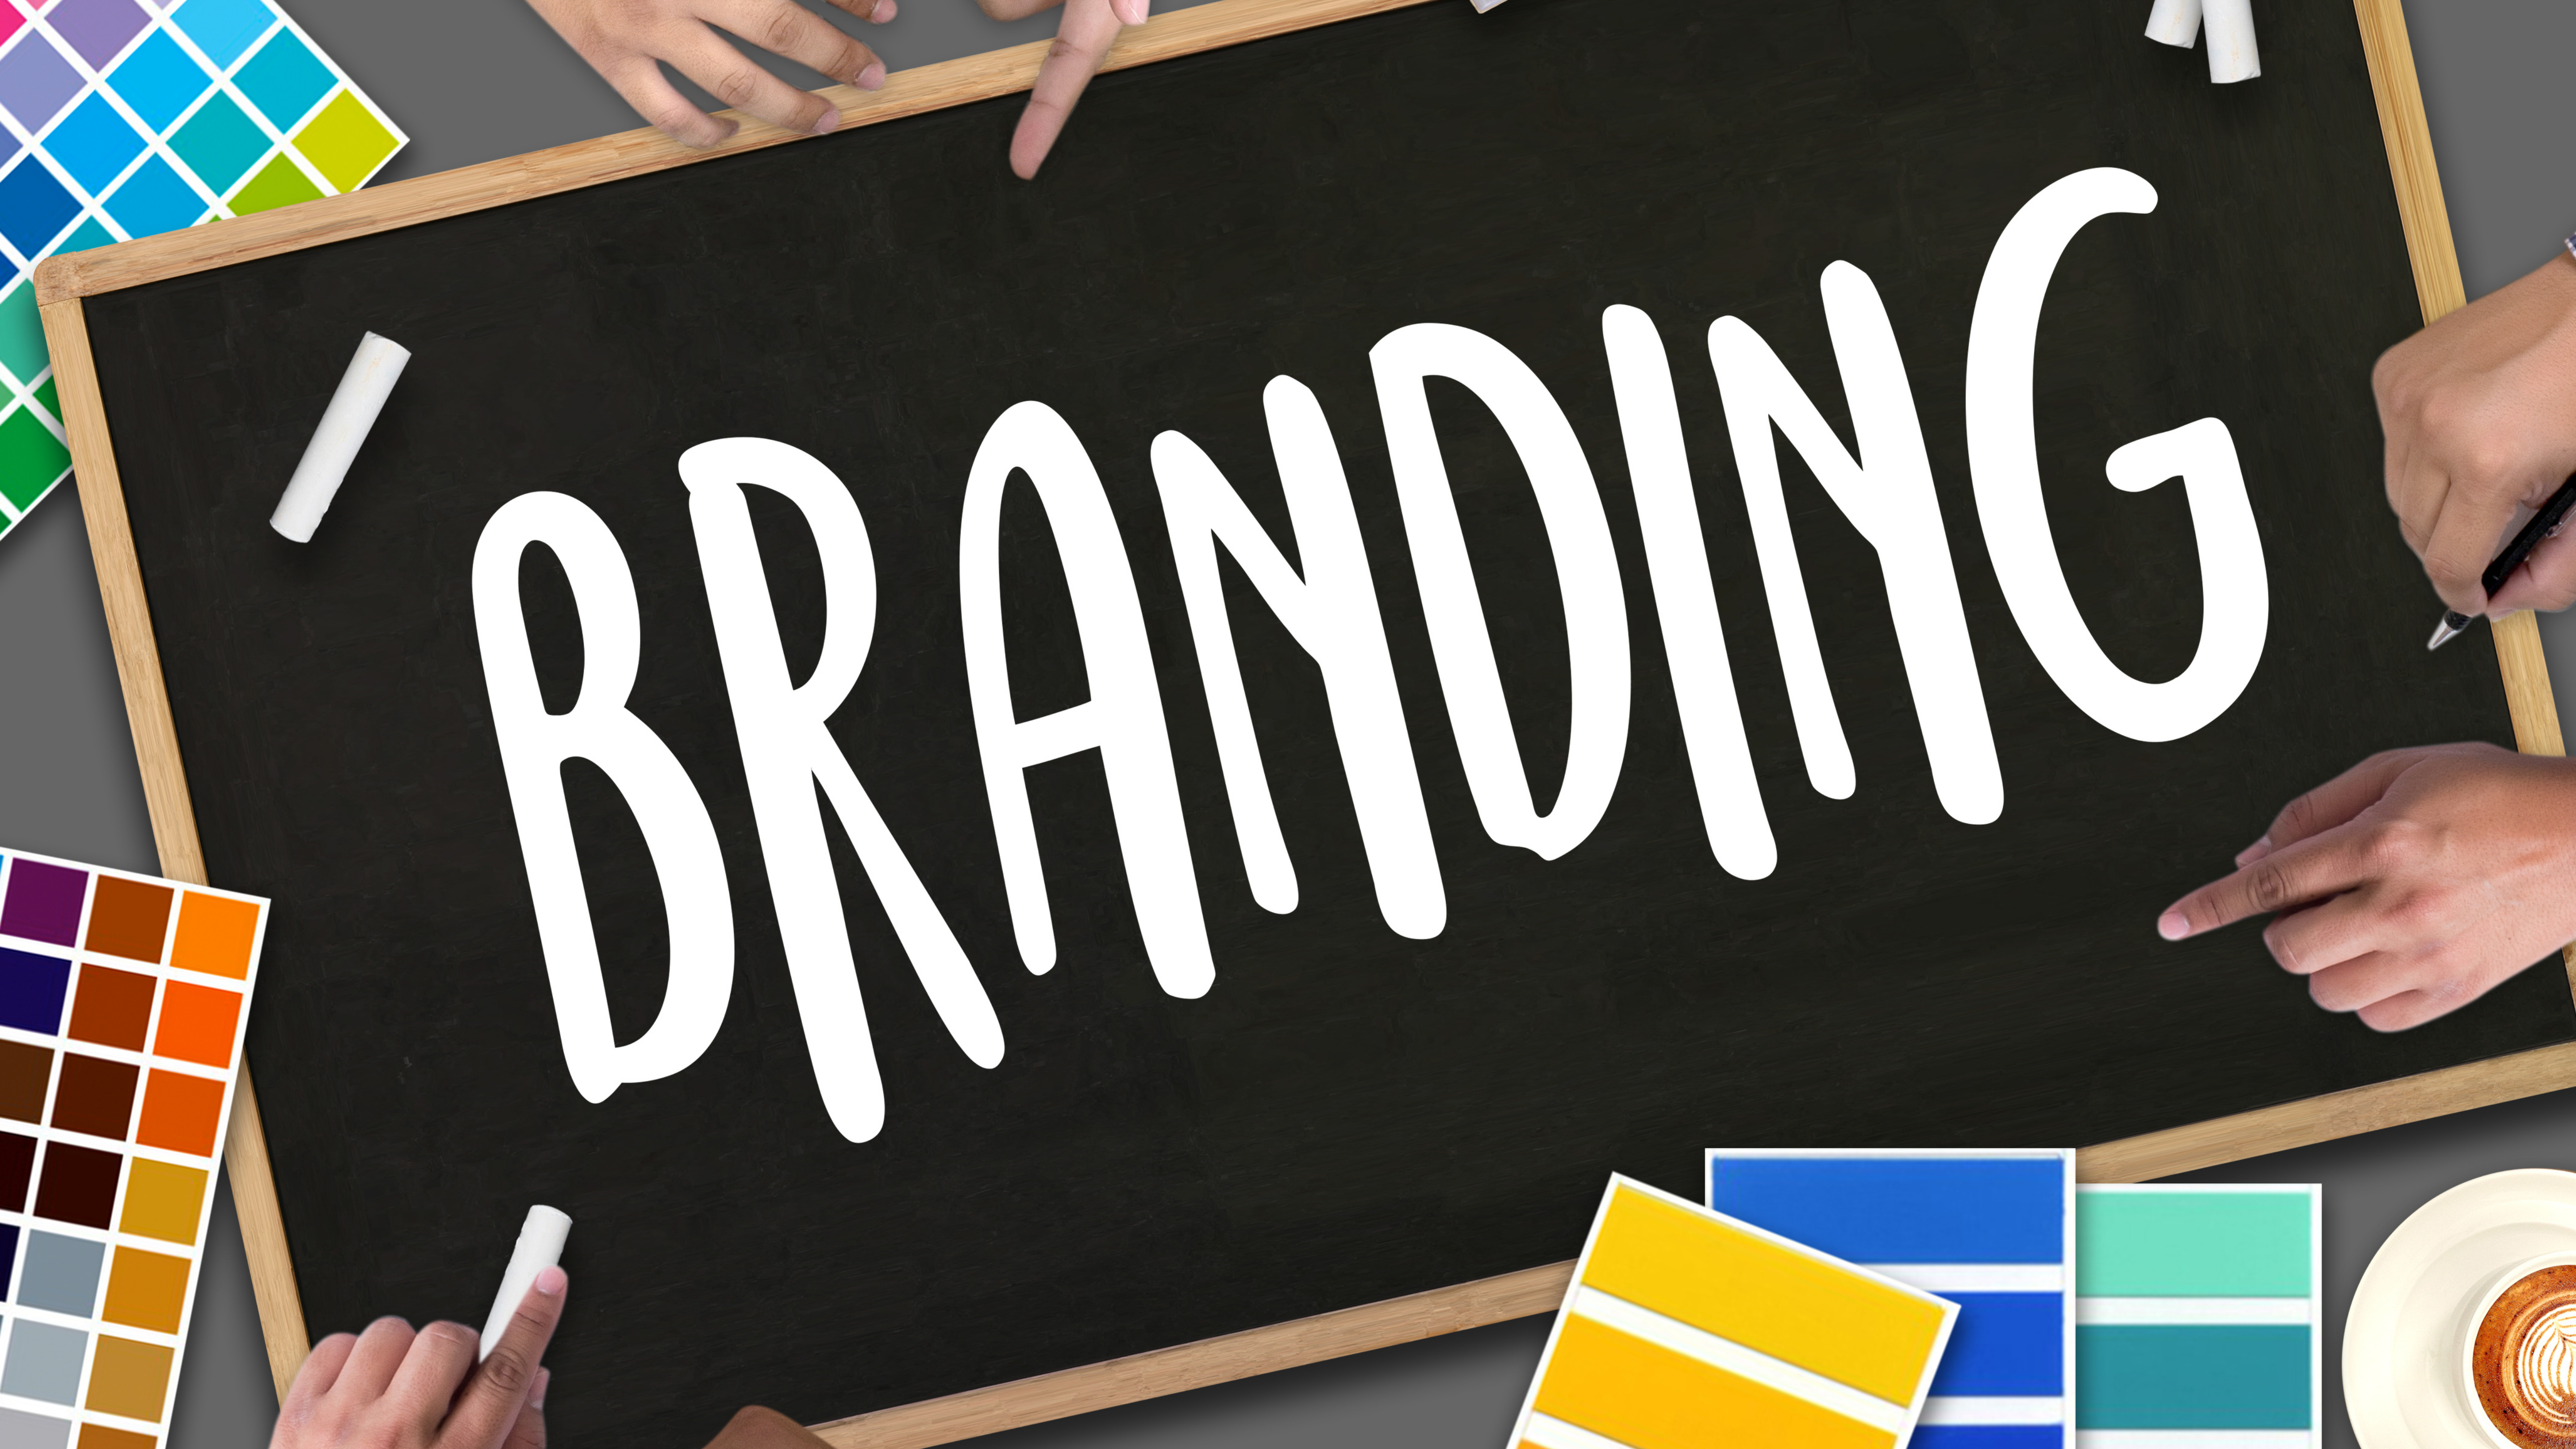 Branding and influence